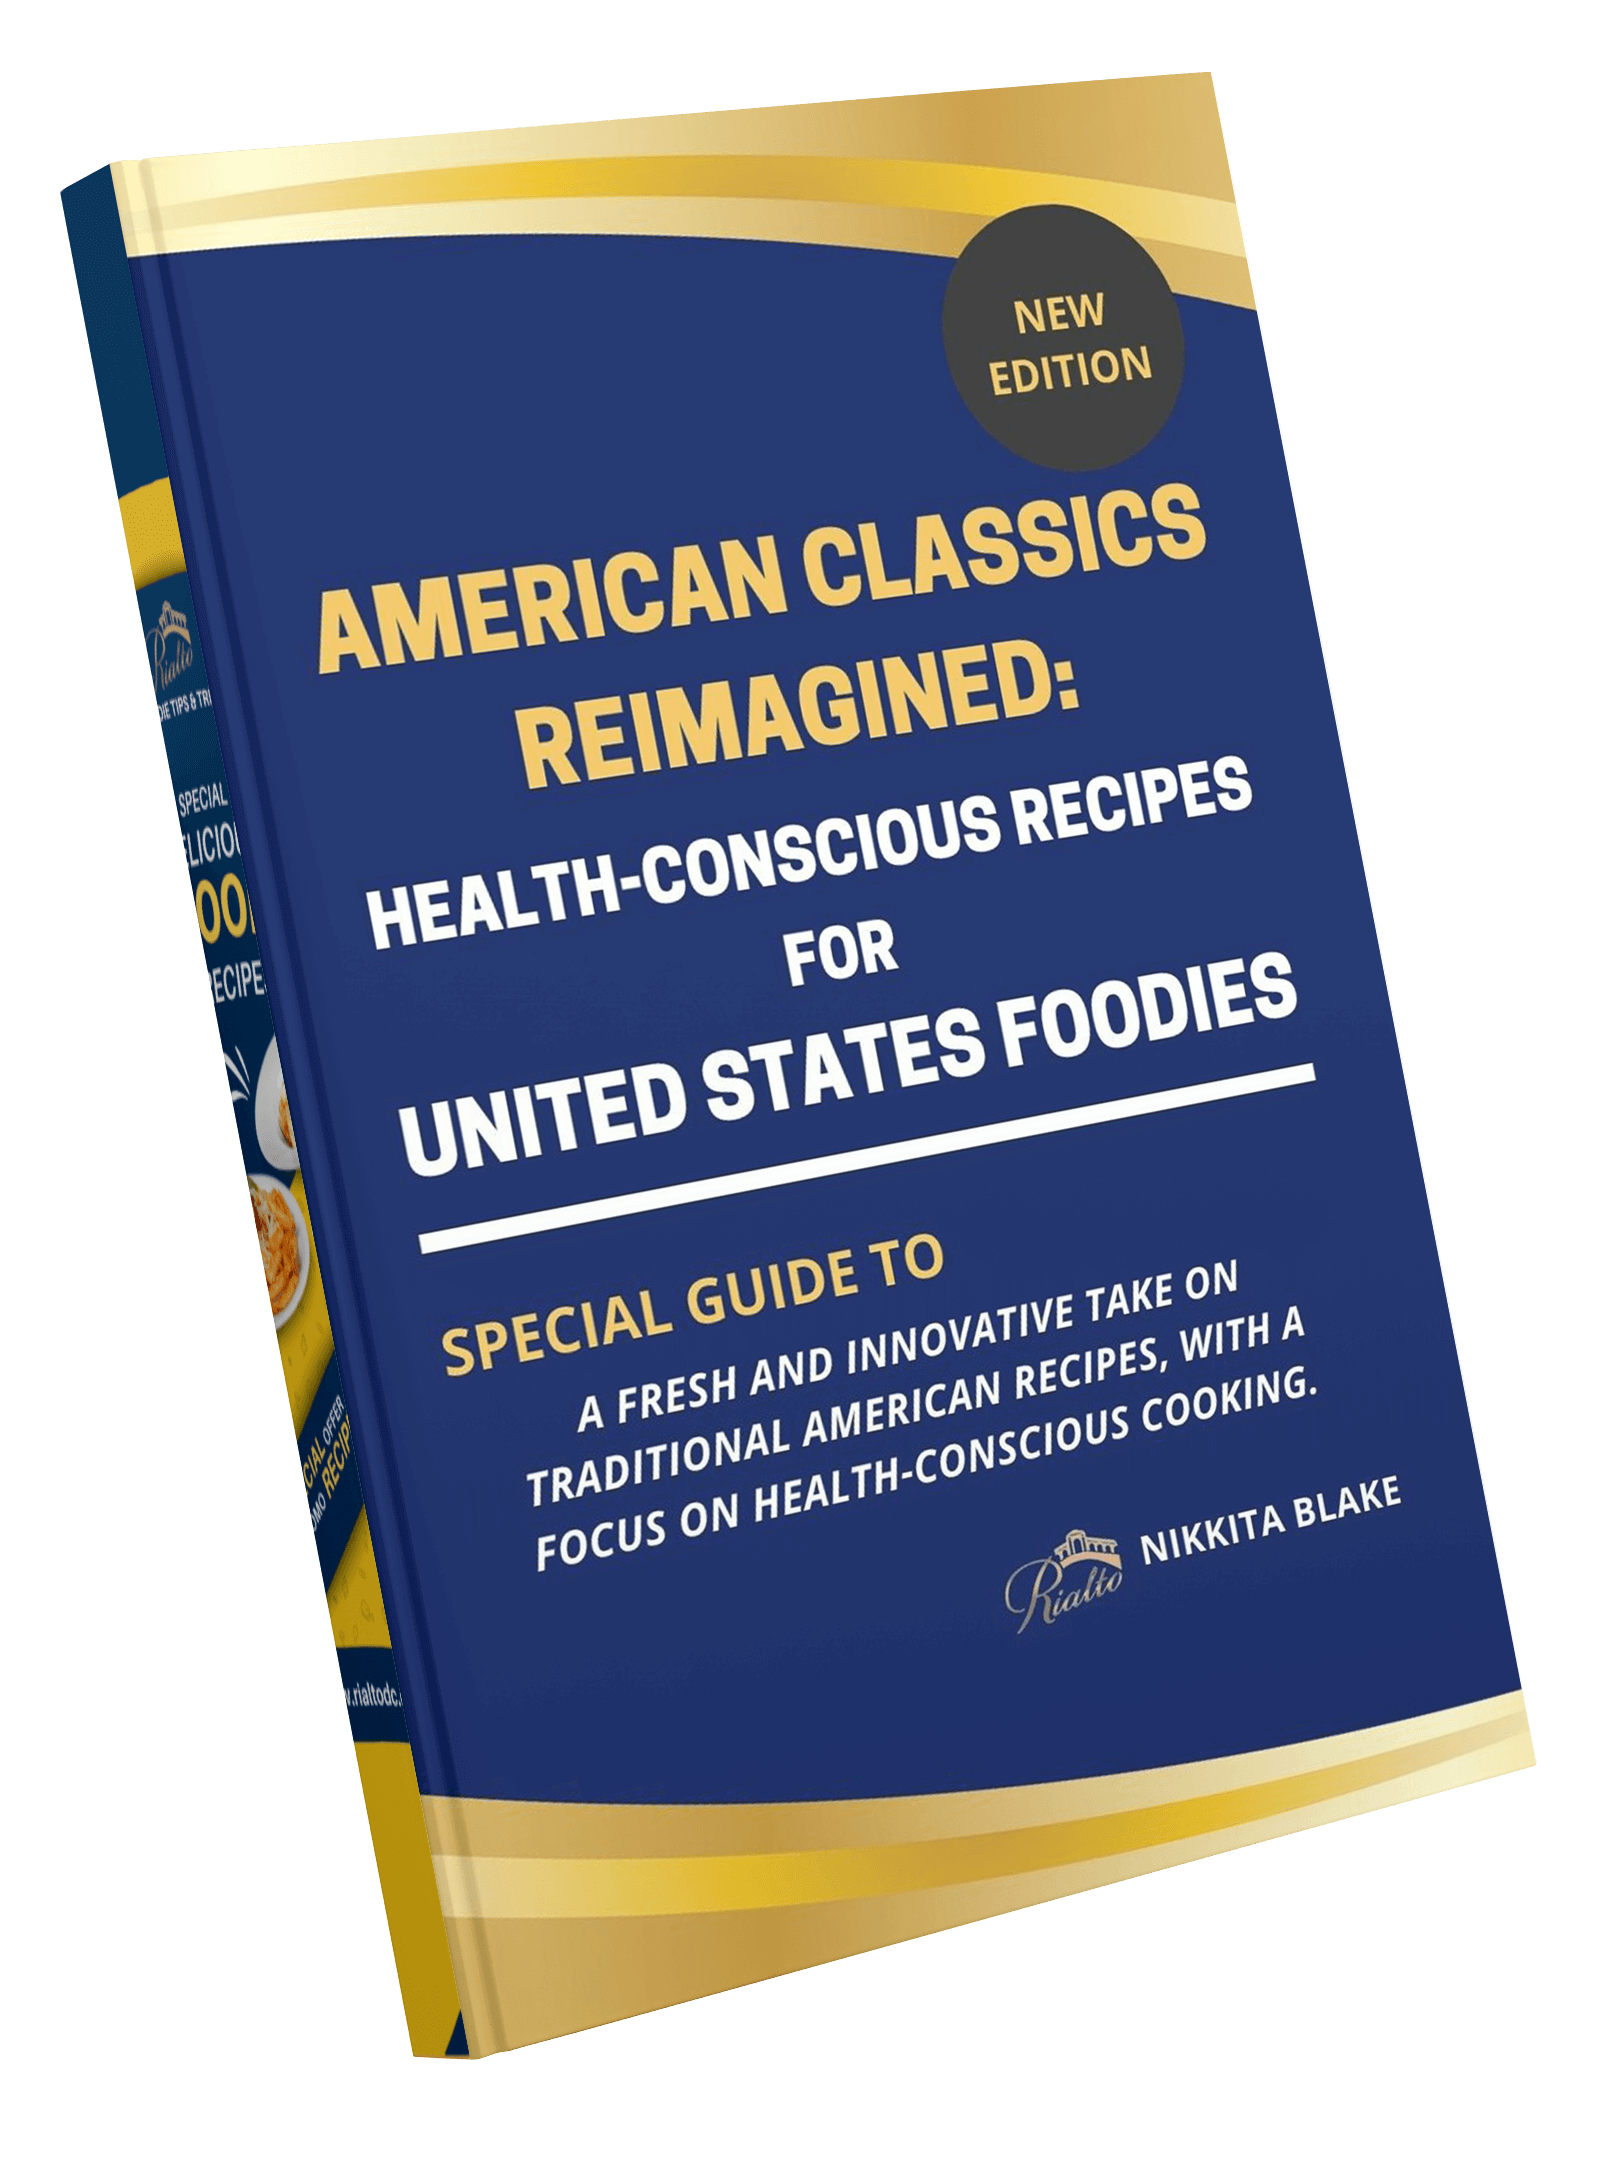 American Classic Reimagined Health-Conscious Recipes For United States Foodies